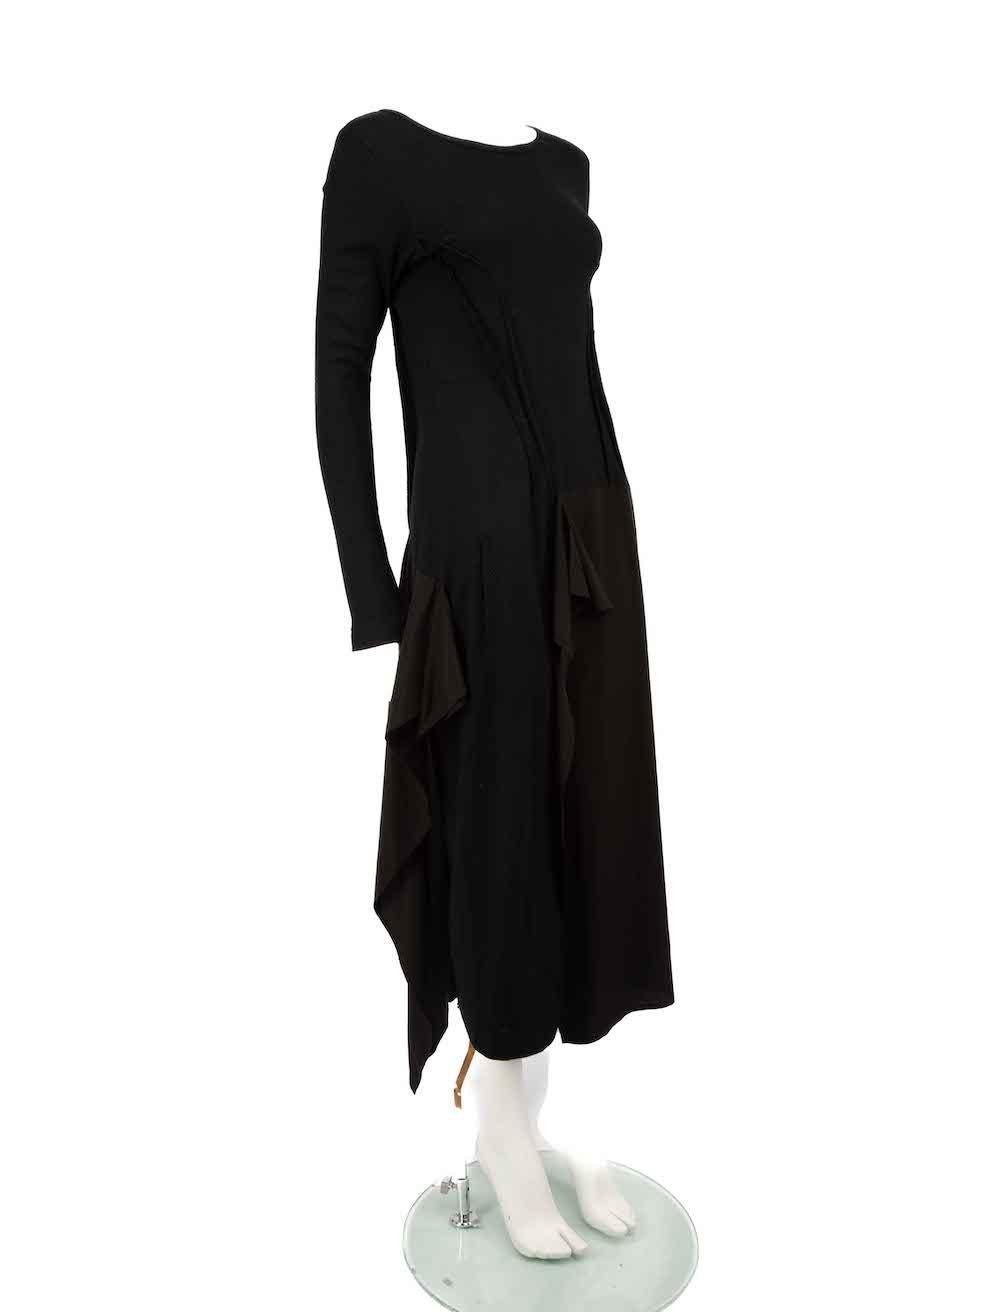 CONDITION is Very good. Minimal wear to dress is evident. Minimal pull thread to front and back of skirt on this used Michiko by Y's designer resale item.
 
 
 
 Details
 
 
 Black
 
 Wool
 
 Dress
 
 Midi
 
 Long sleeves
 
 Synthetic ruffle skirt
